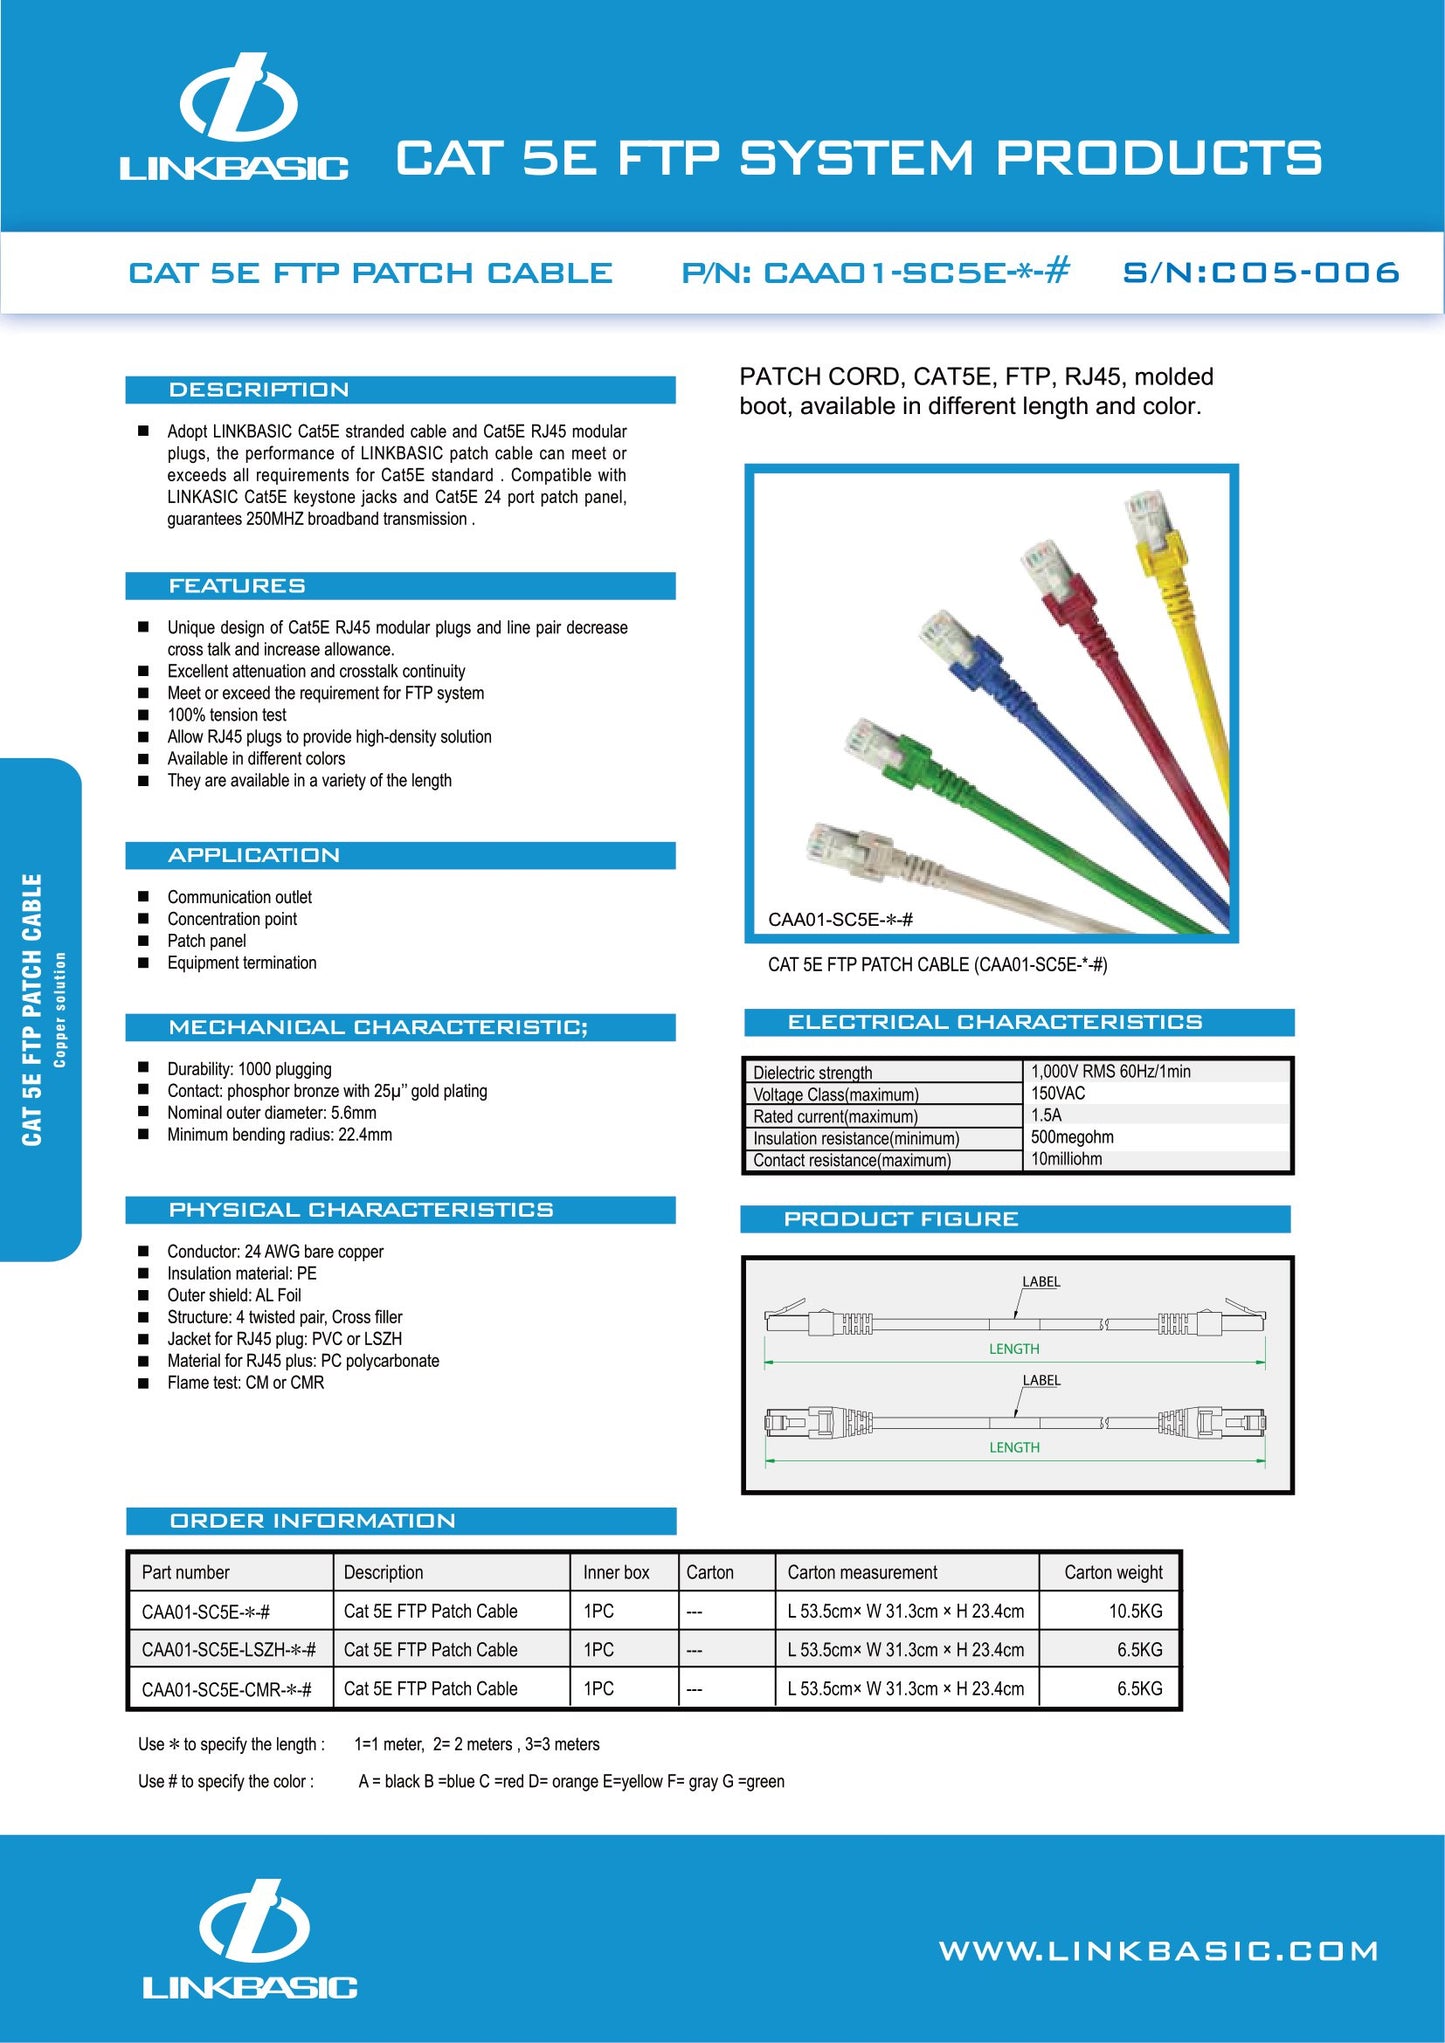 Linkbasic 1 Meter FTP Cat5e Flylead, Patch Cable